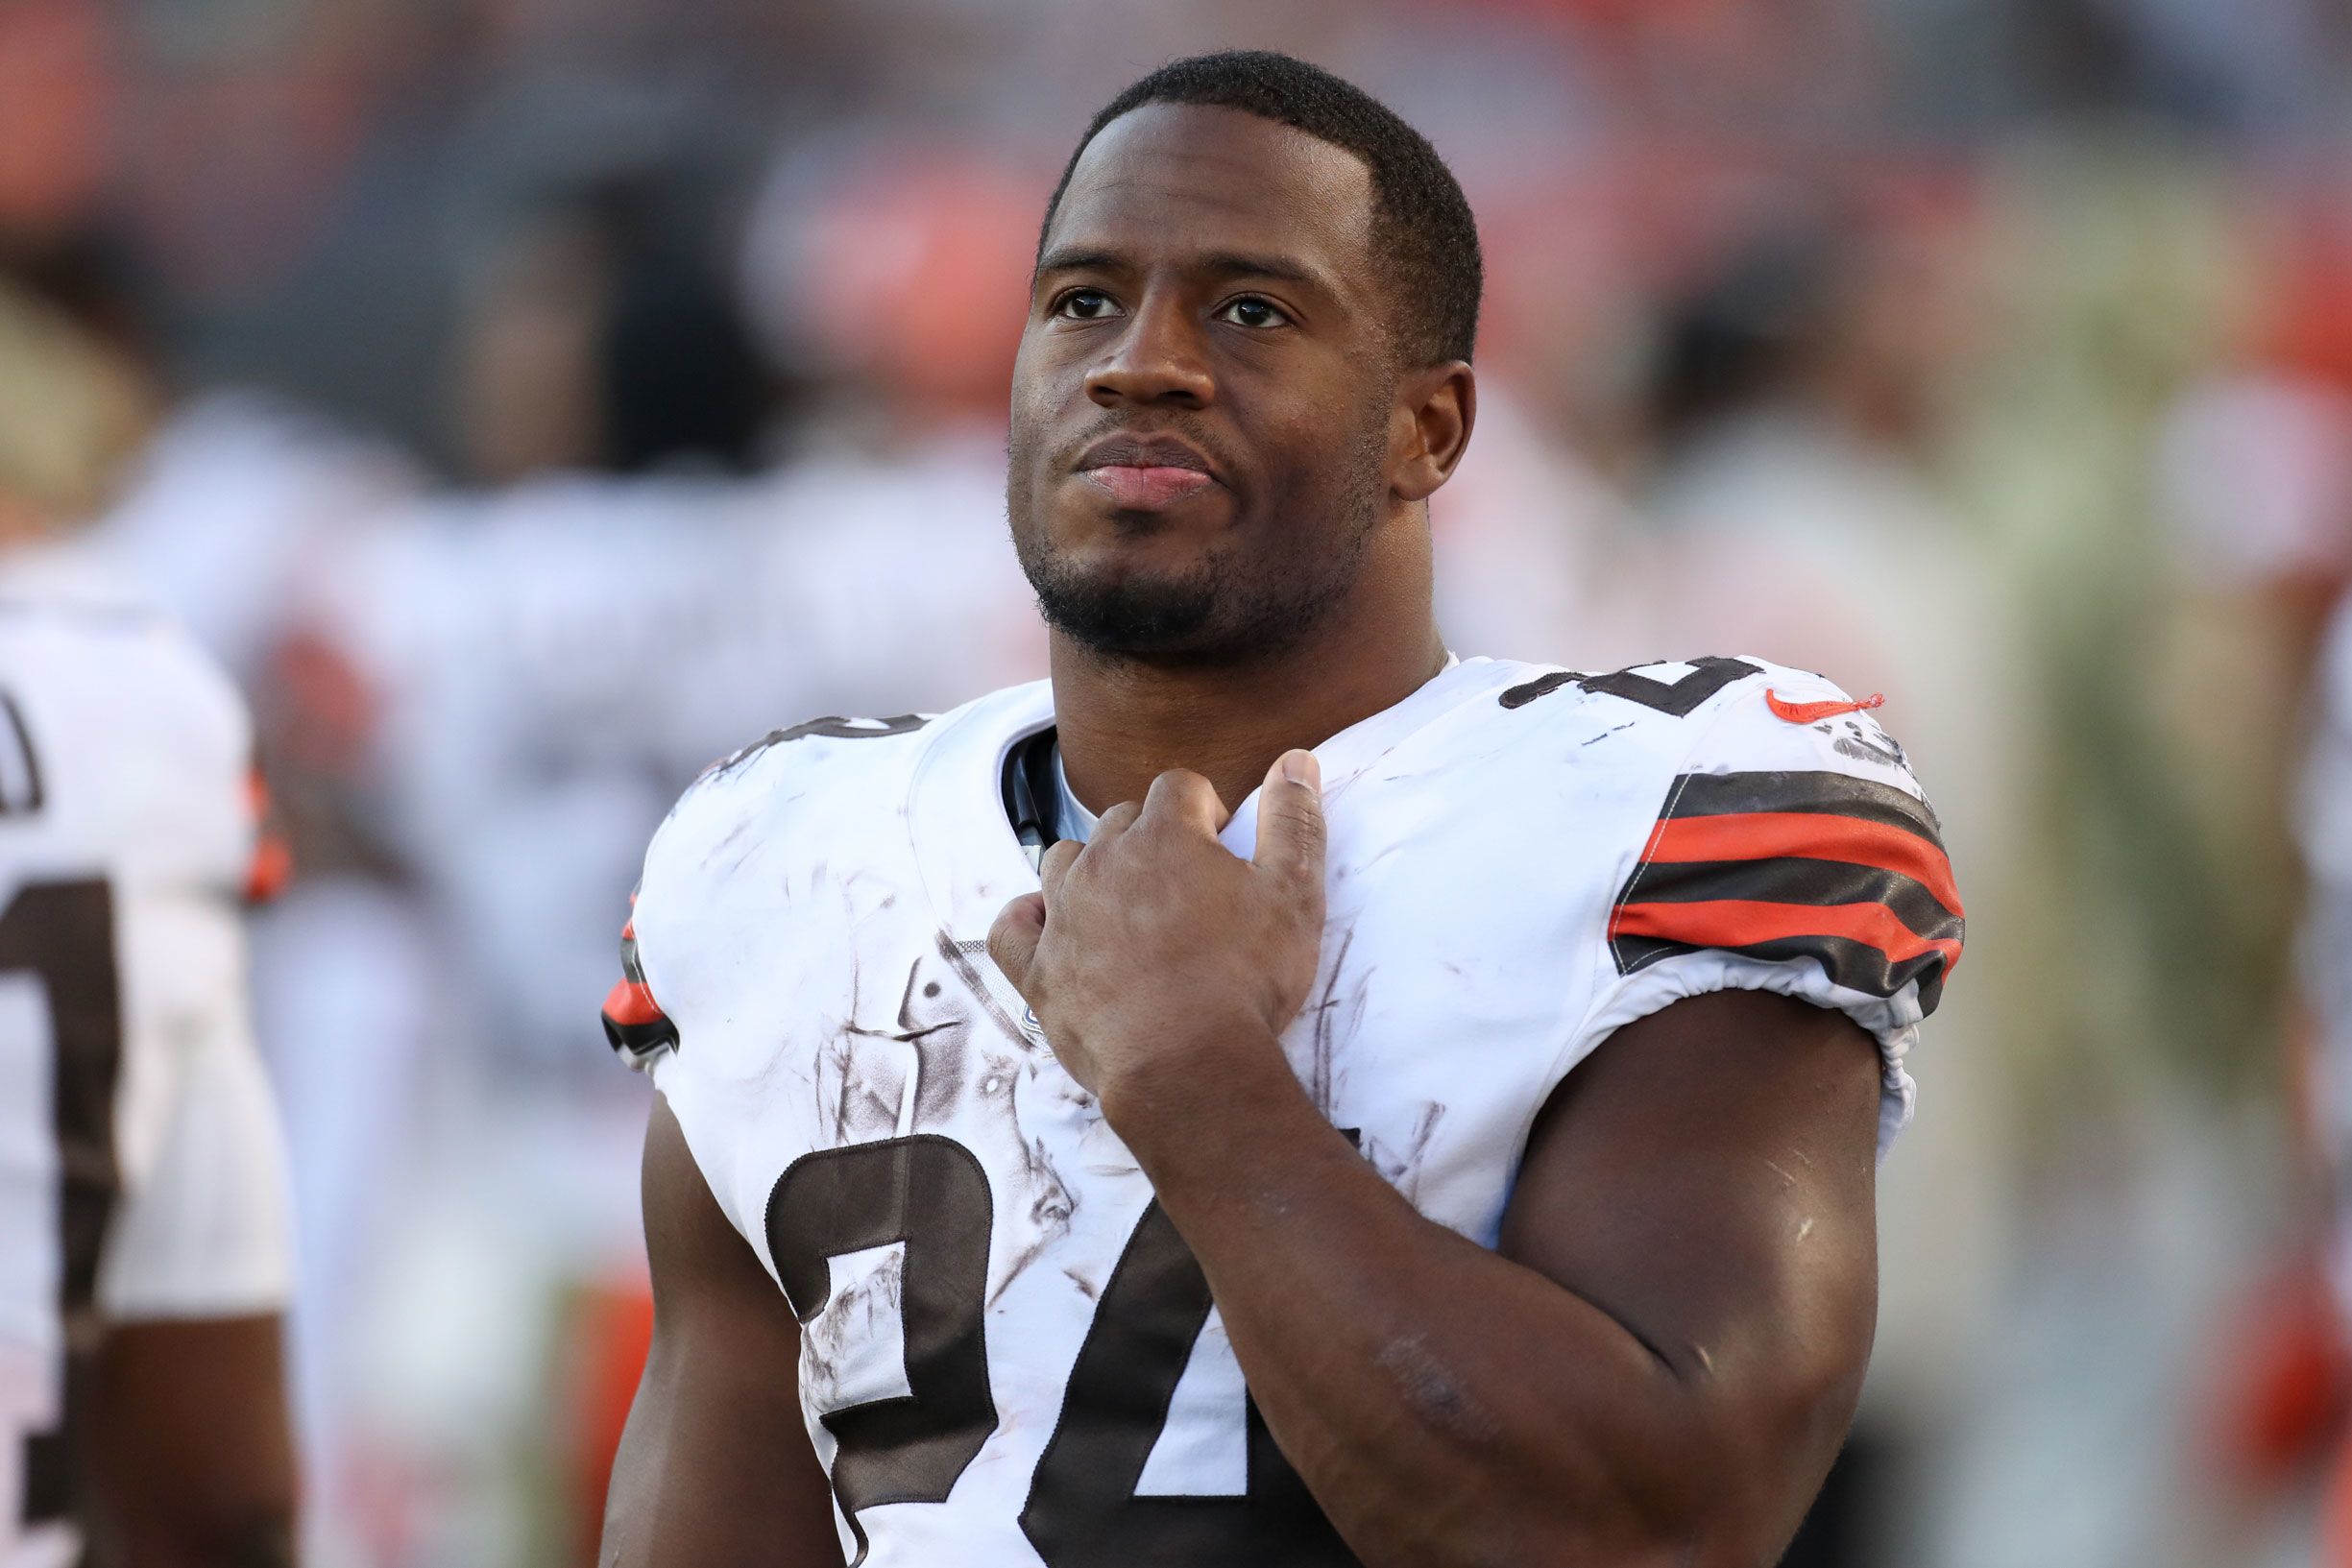 chubb cleveland browns